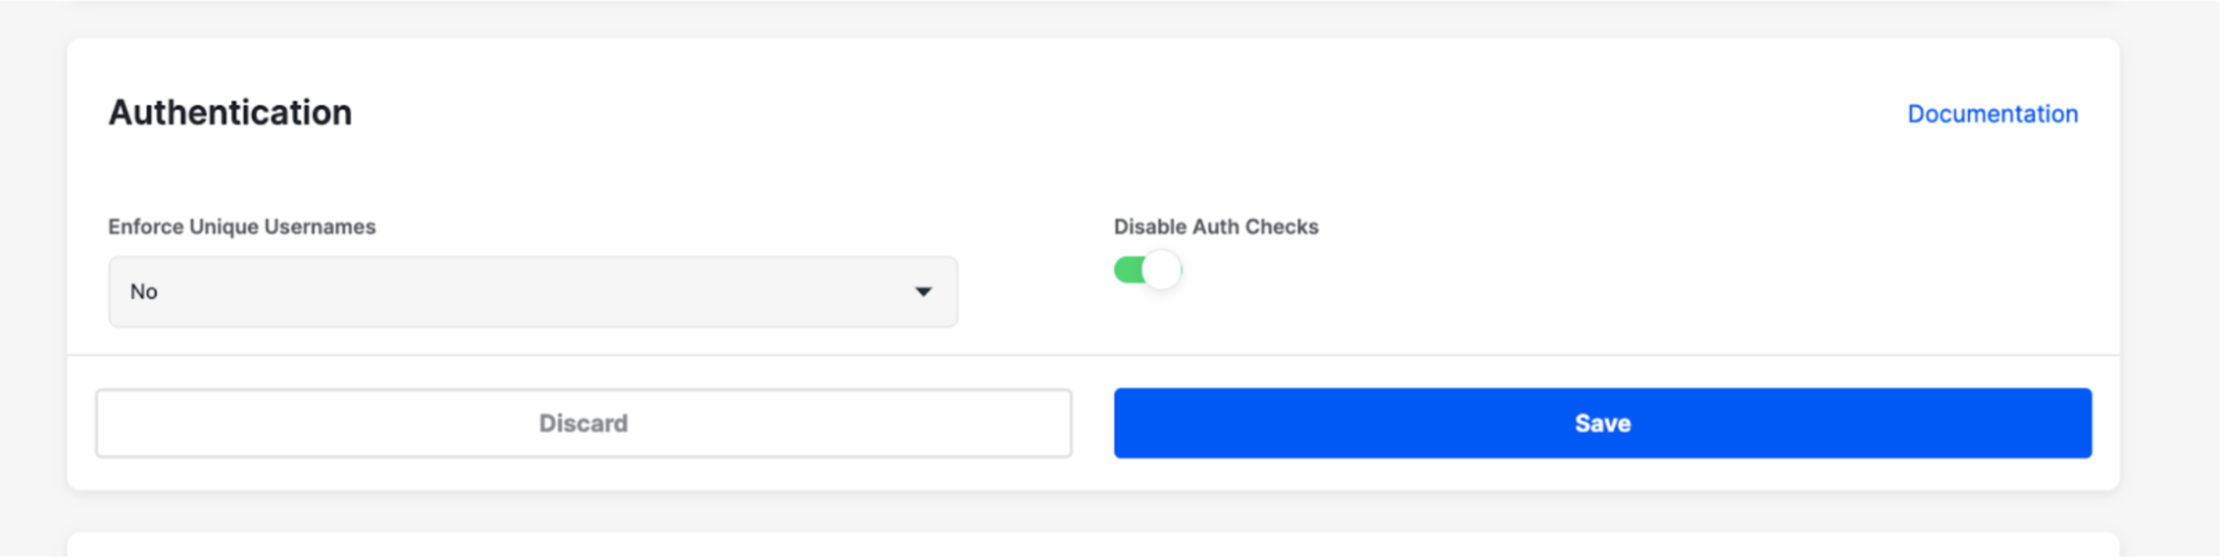 Authentication Section Stream Dashboard